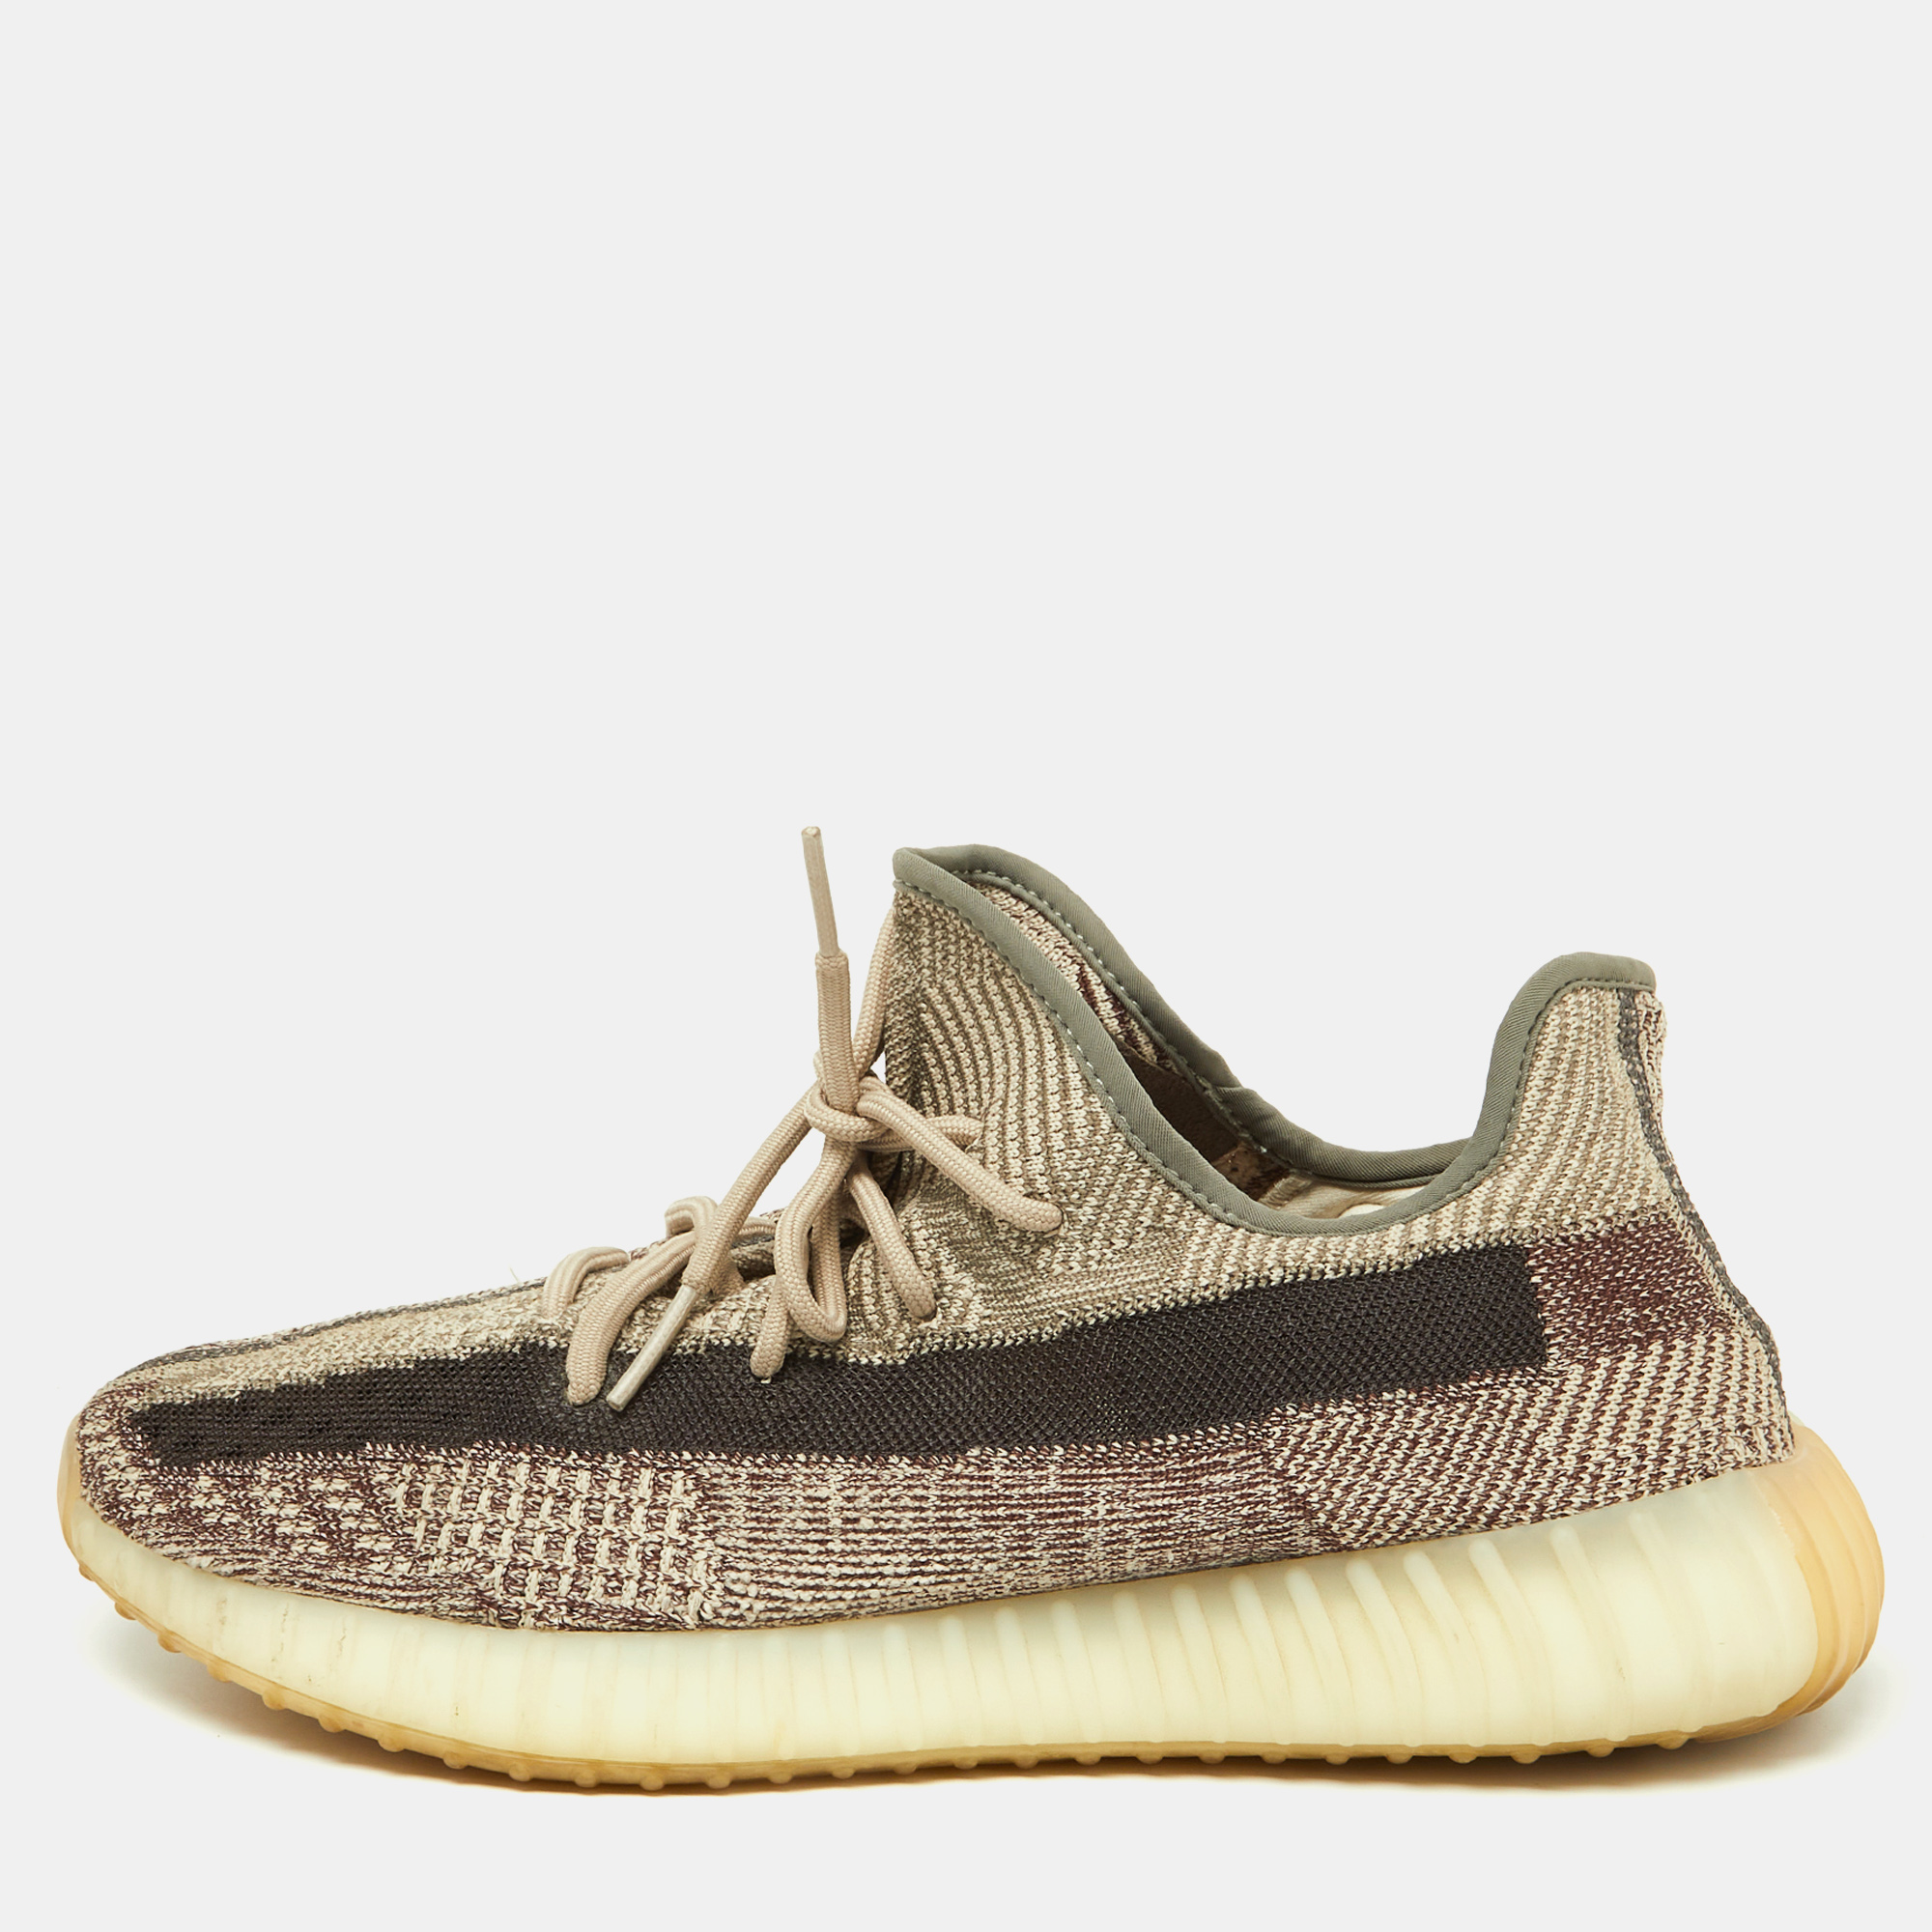 

Yeezy x Adidas Brown/Beige Knit Fabric Boost 350 V2 Zyon Sneakers Size 48